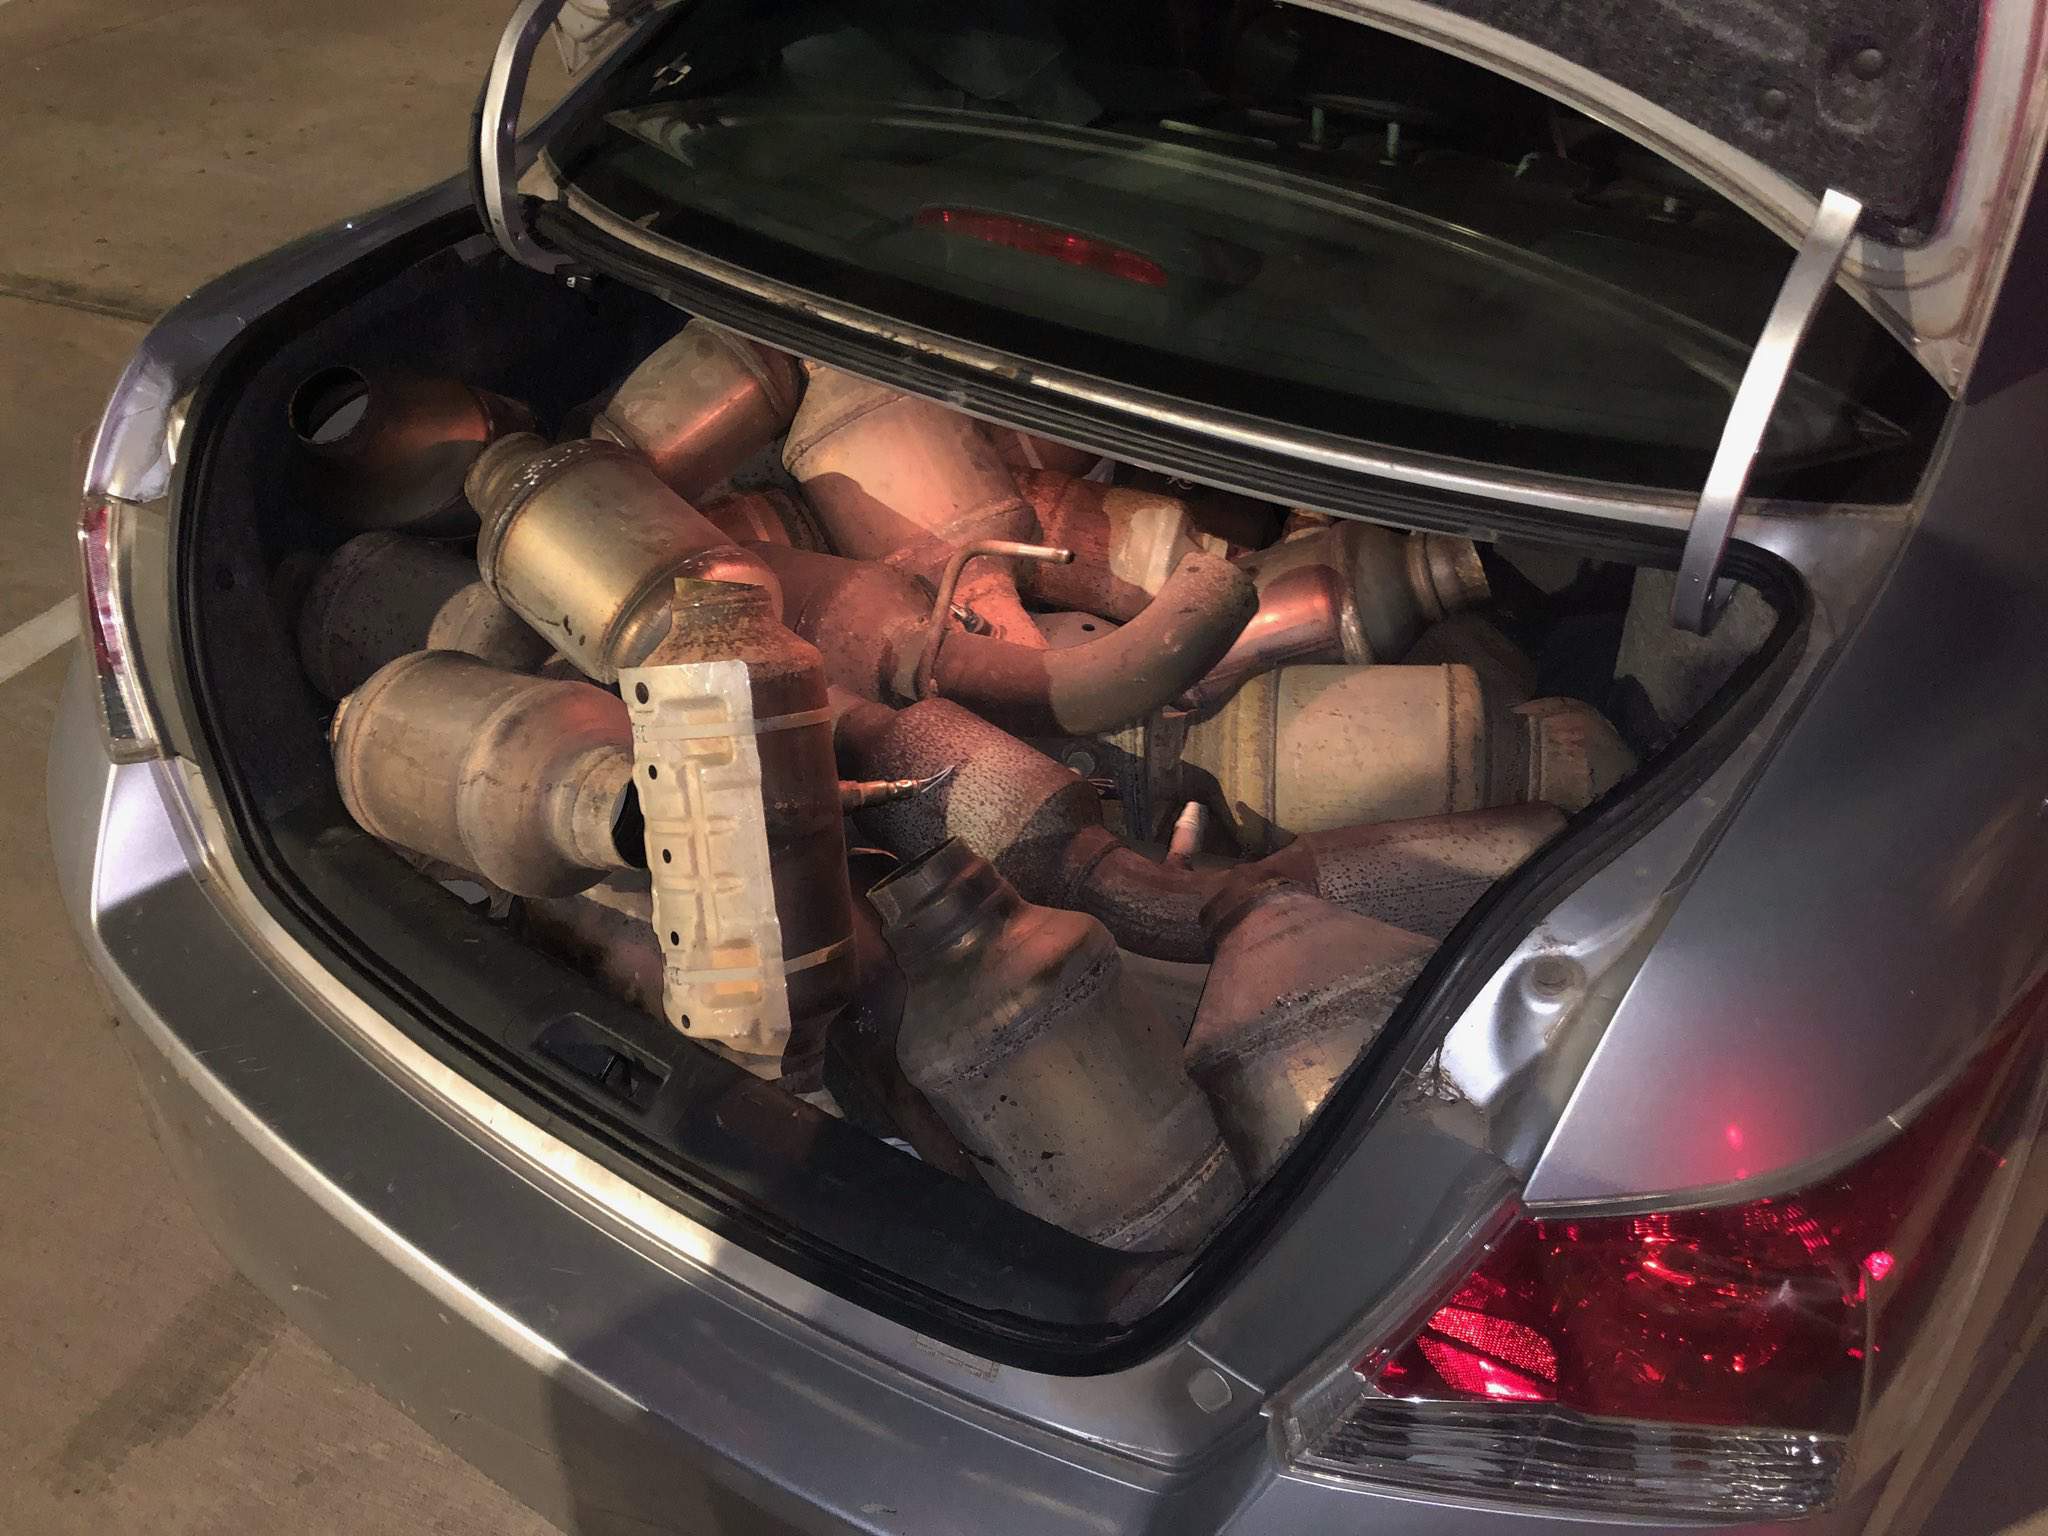 GALLERY: 32 stolen catalytic converters found in vehicle after suspects arrested during chase, HCSO says